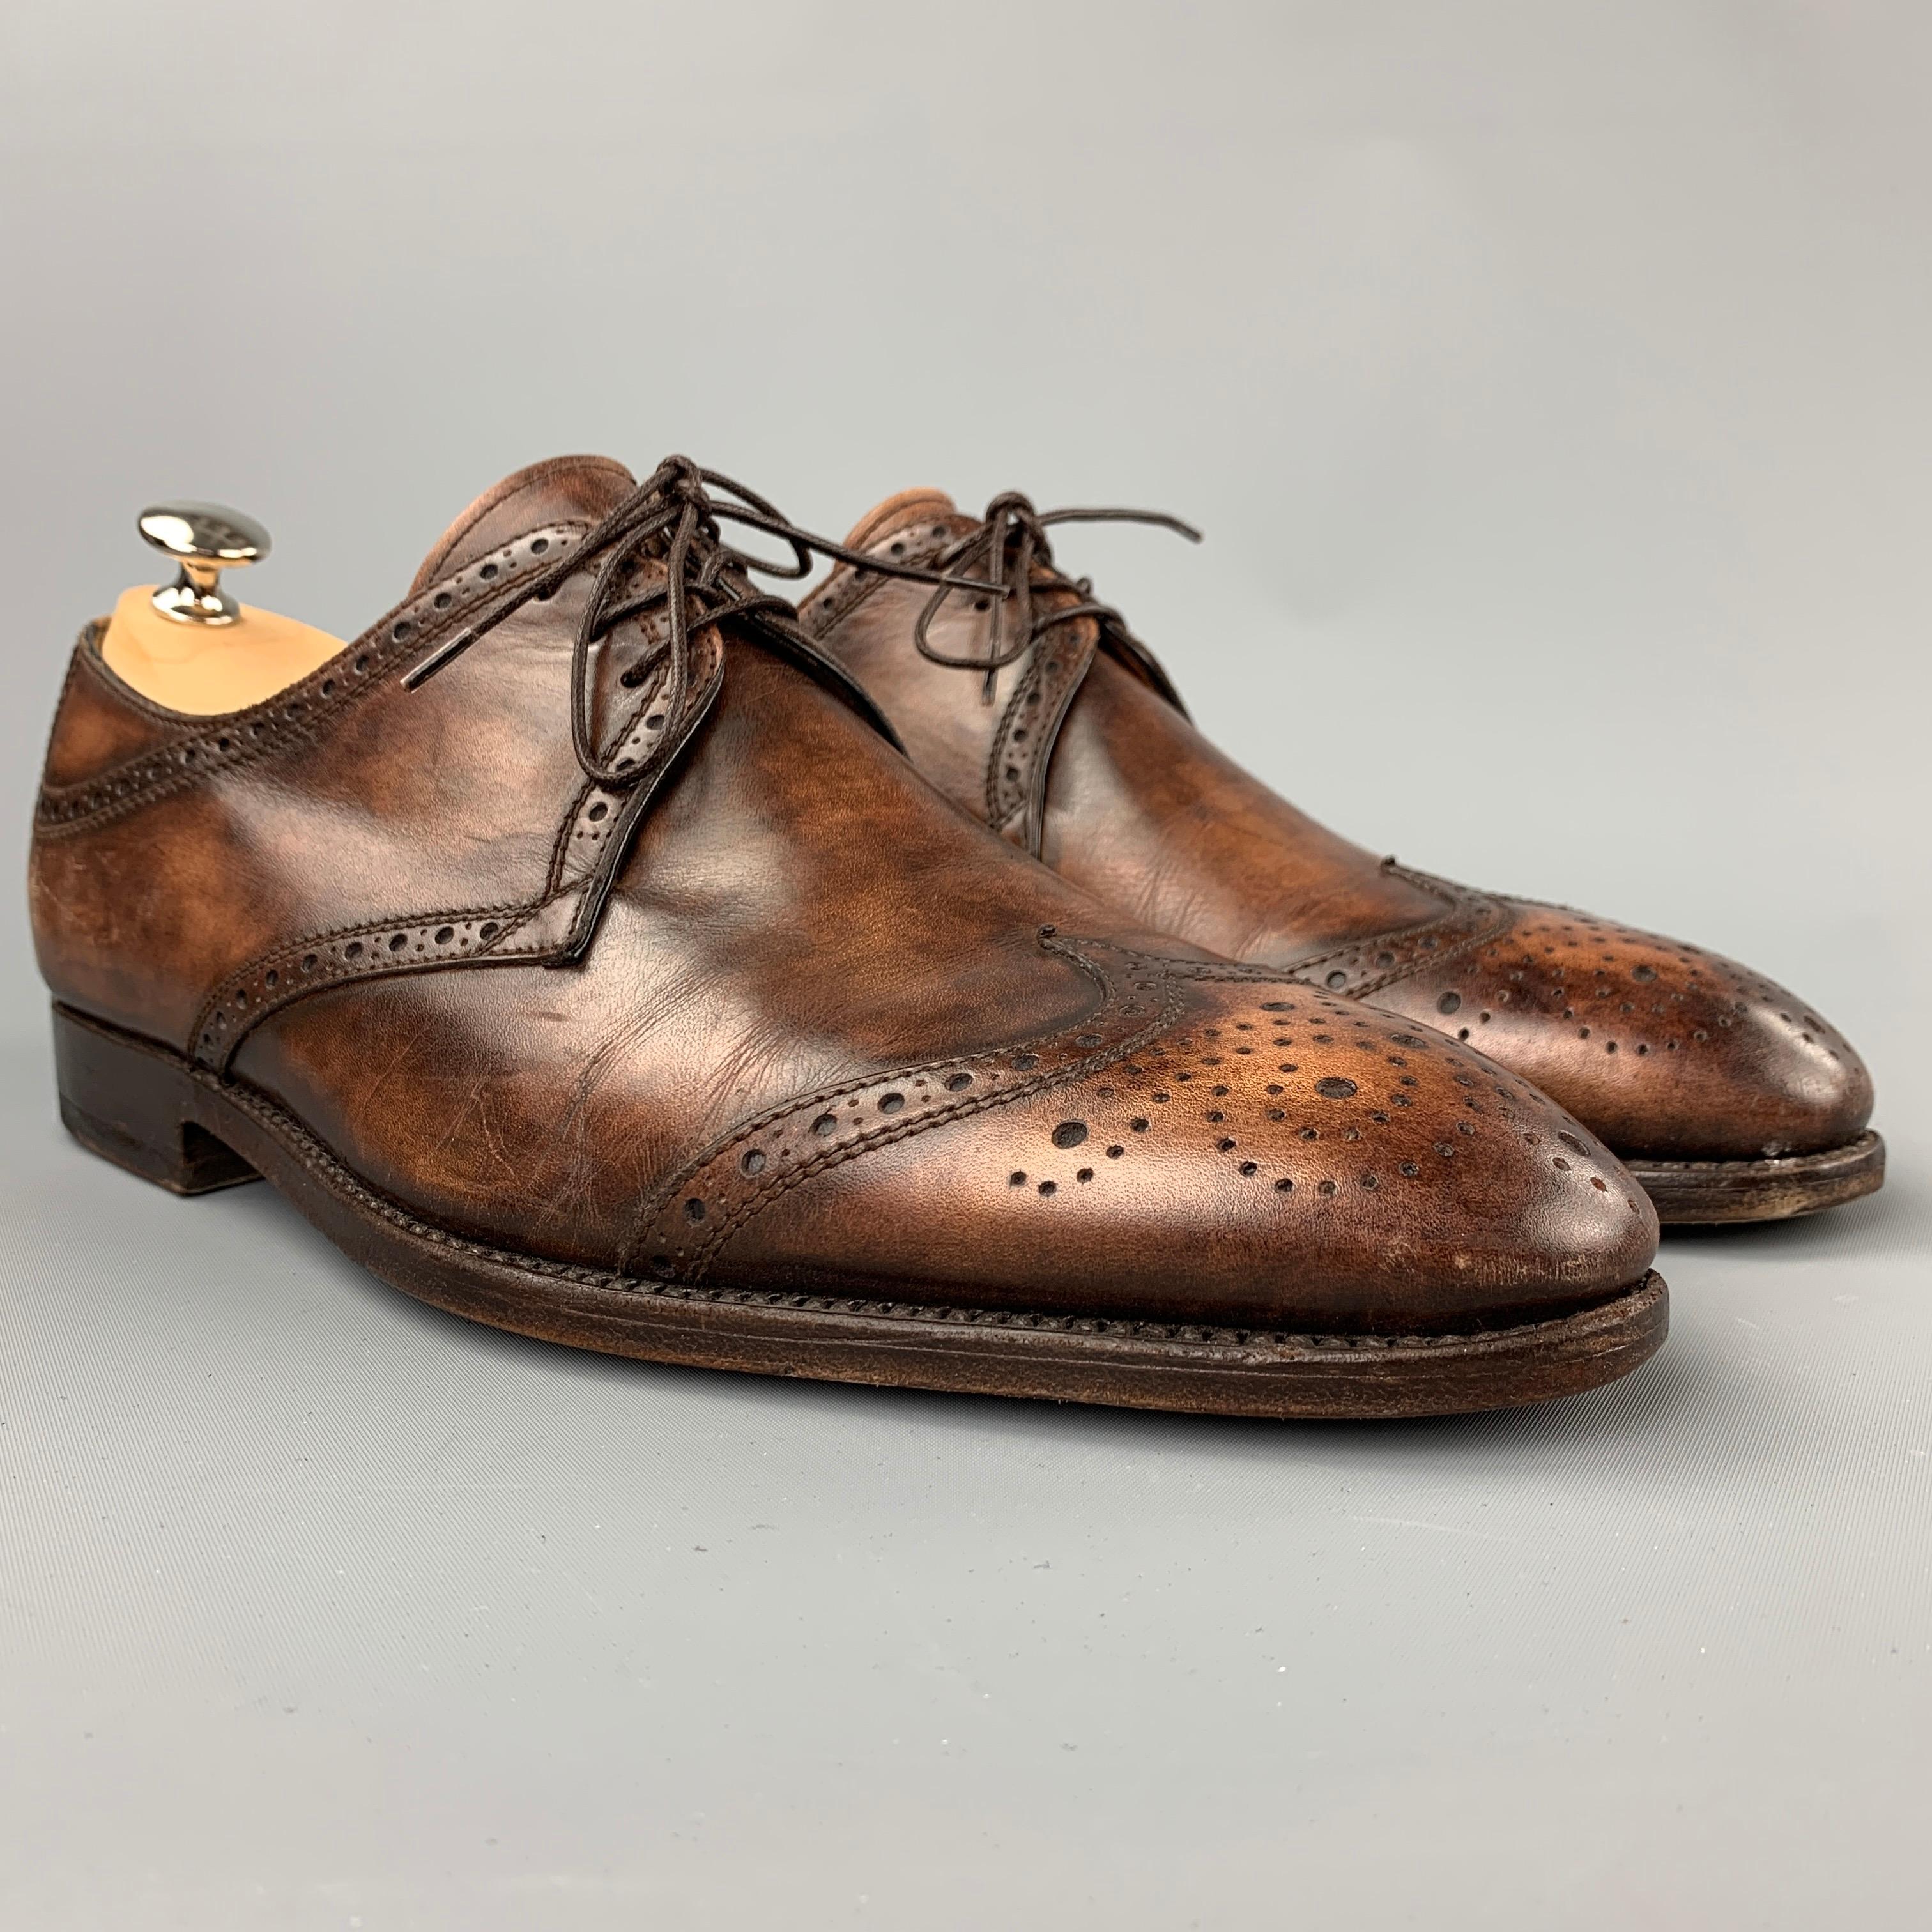 BONTONI dress shoes comes in a brown burnished perforated leather featuring a wingtip, wooden sole, and a lace up closure. Includes shoe horn. Made in Italy.

Very Good Pre-Owned Condition.
Marked: 9/10
Original Retail Price: $1,210.00

Outsole: 12